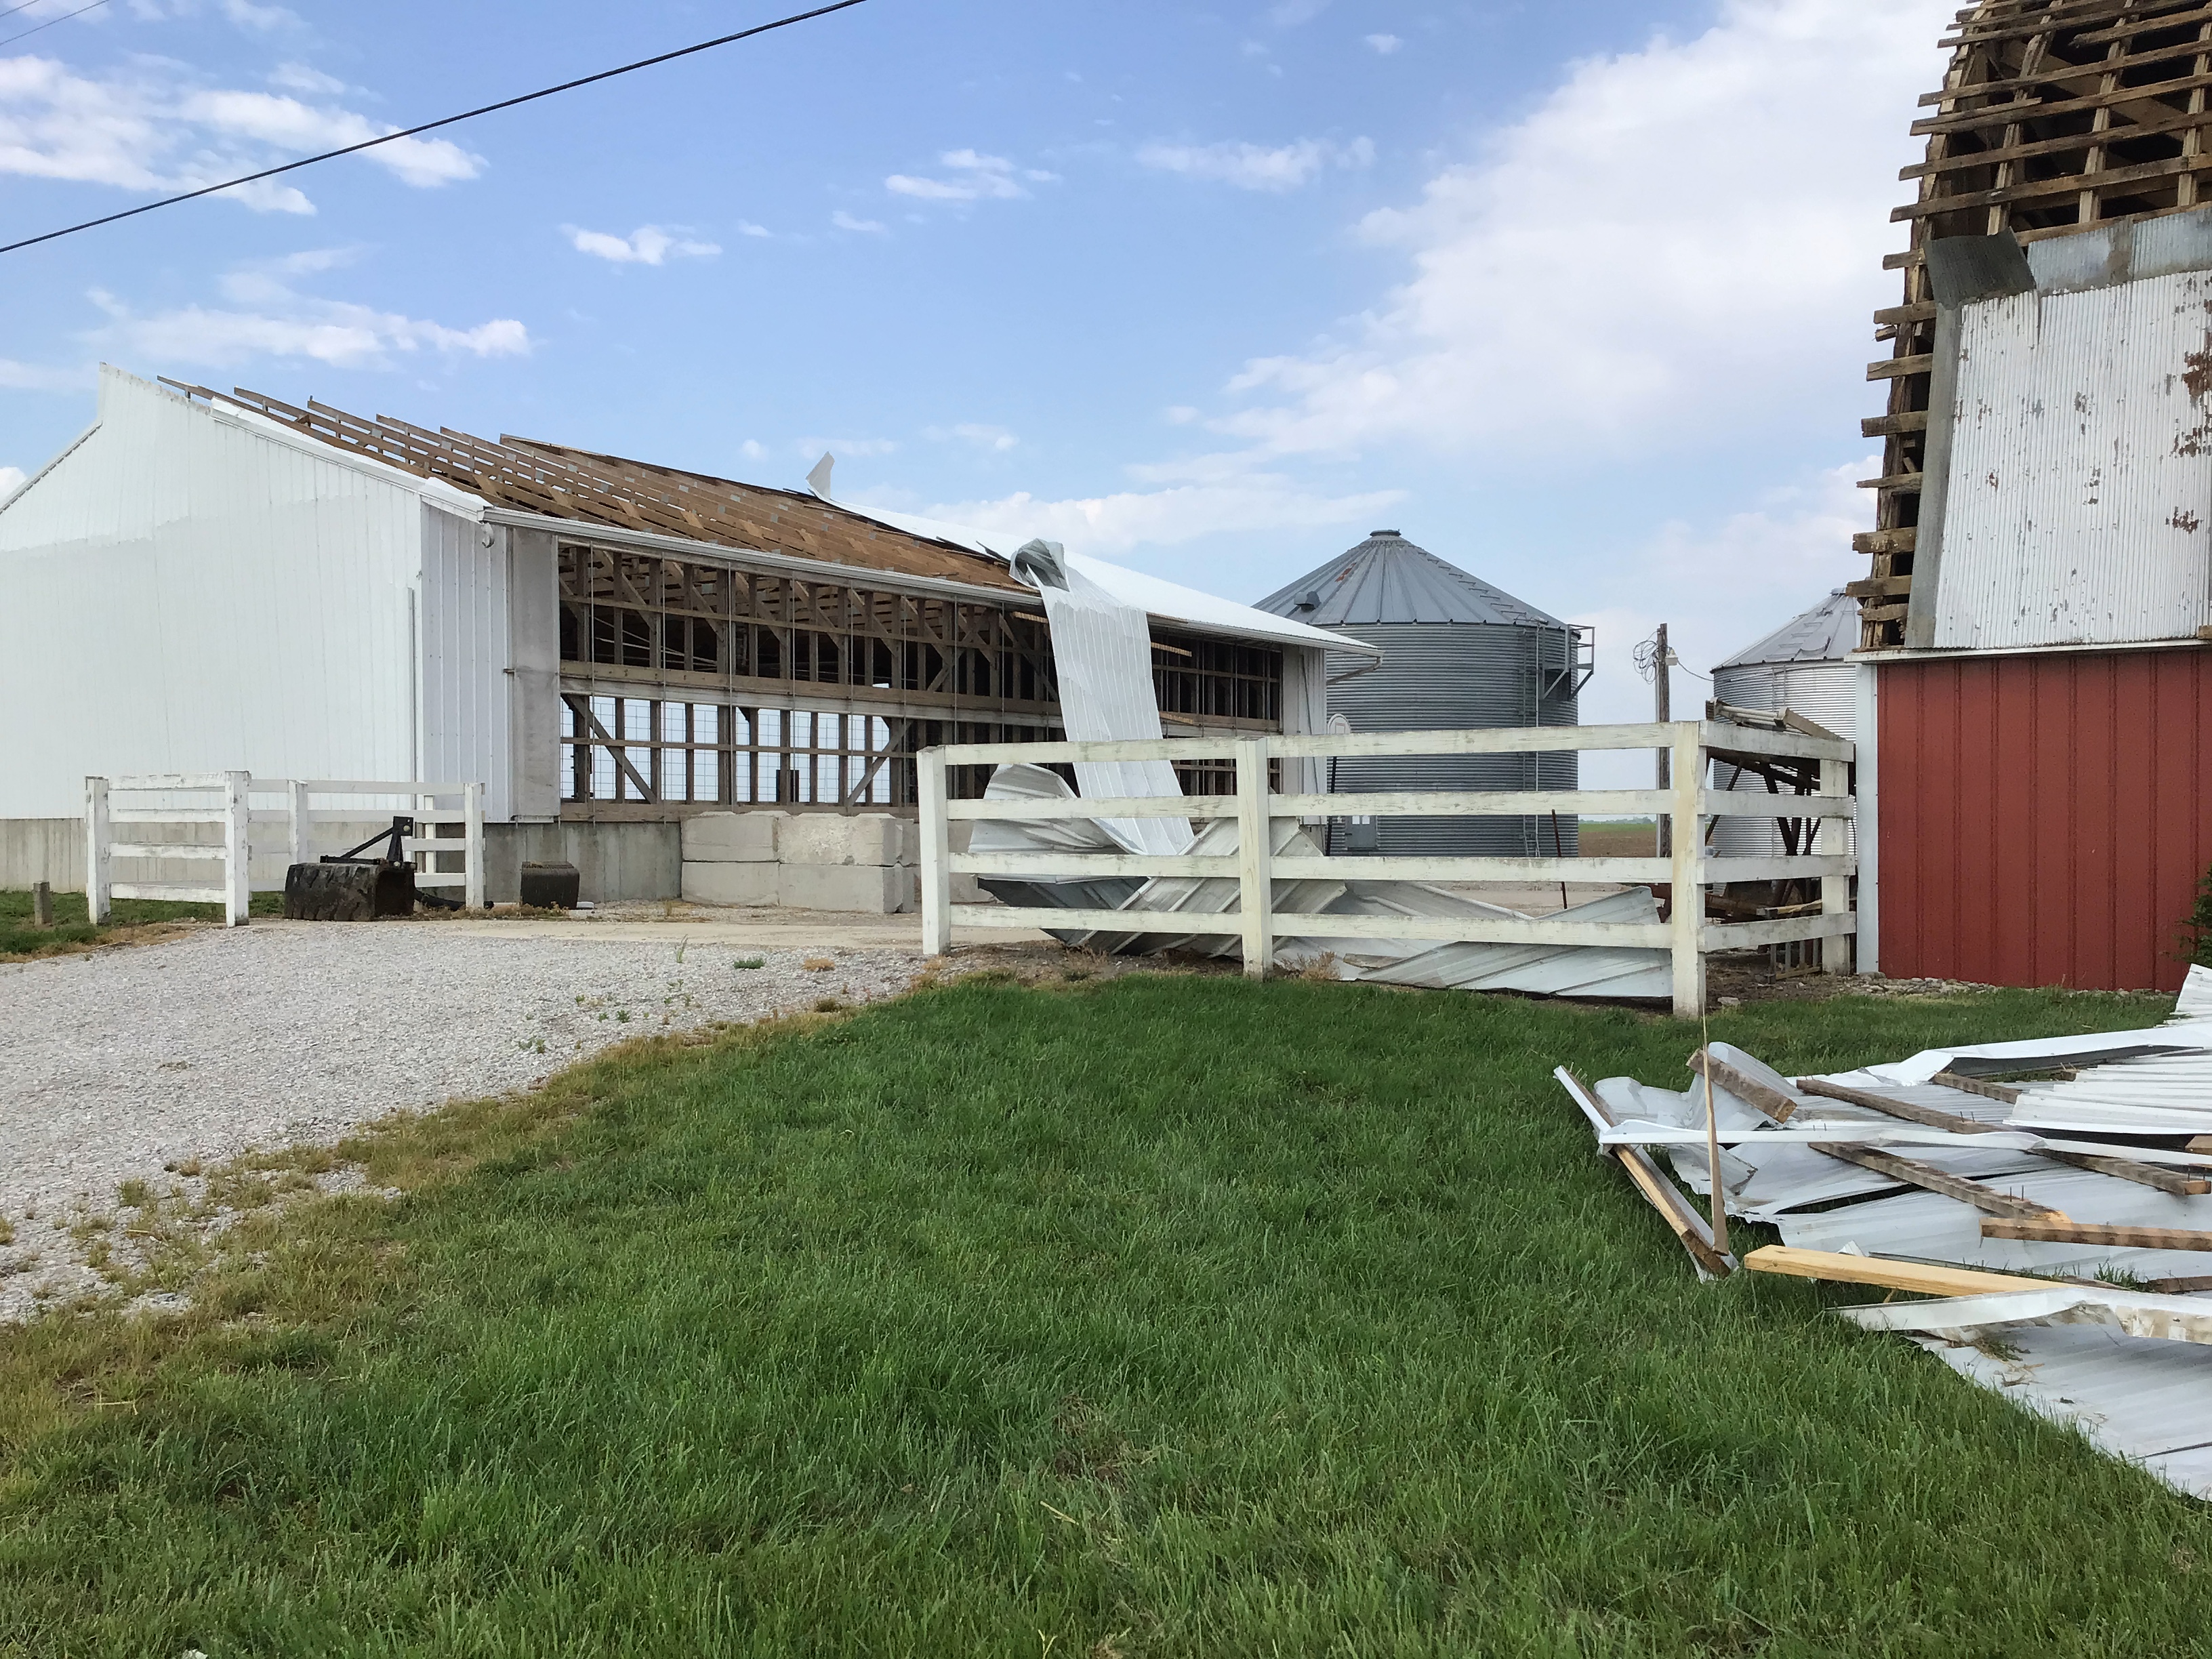 The metal roofs of several outbuildings were largely torn off by the tornado.